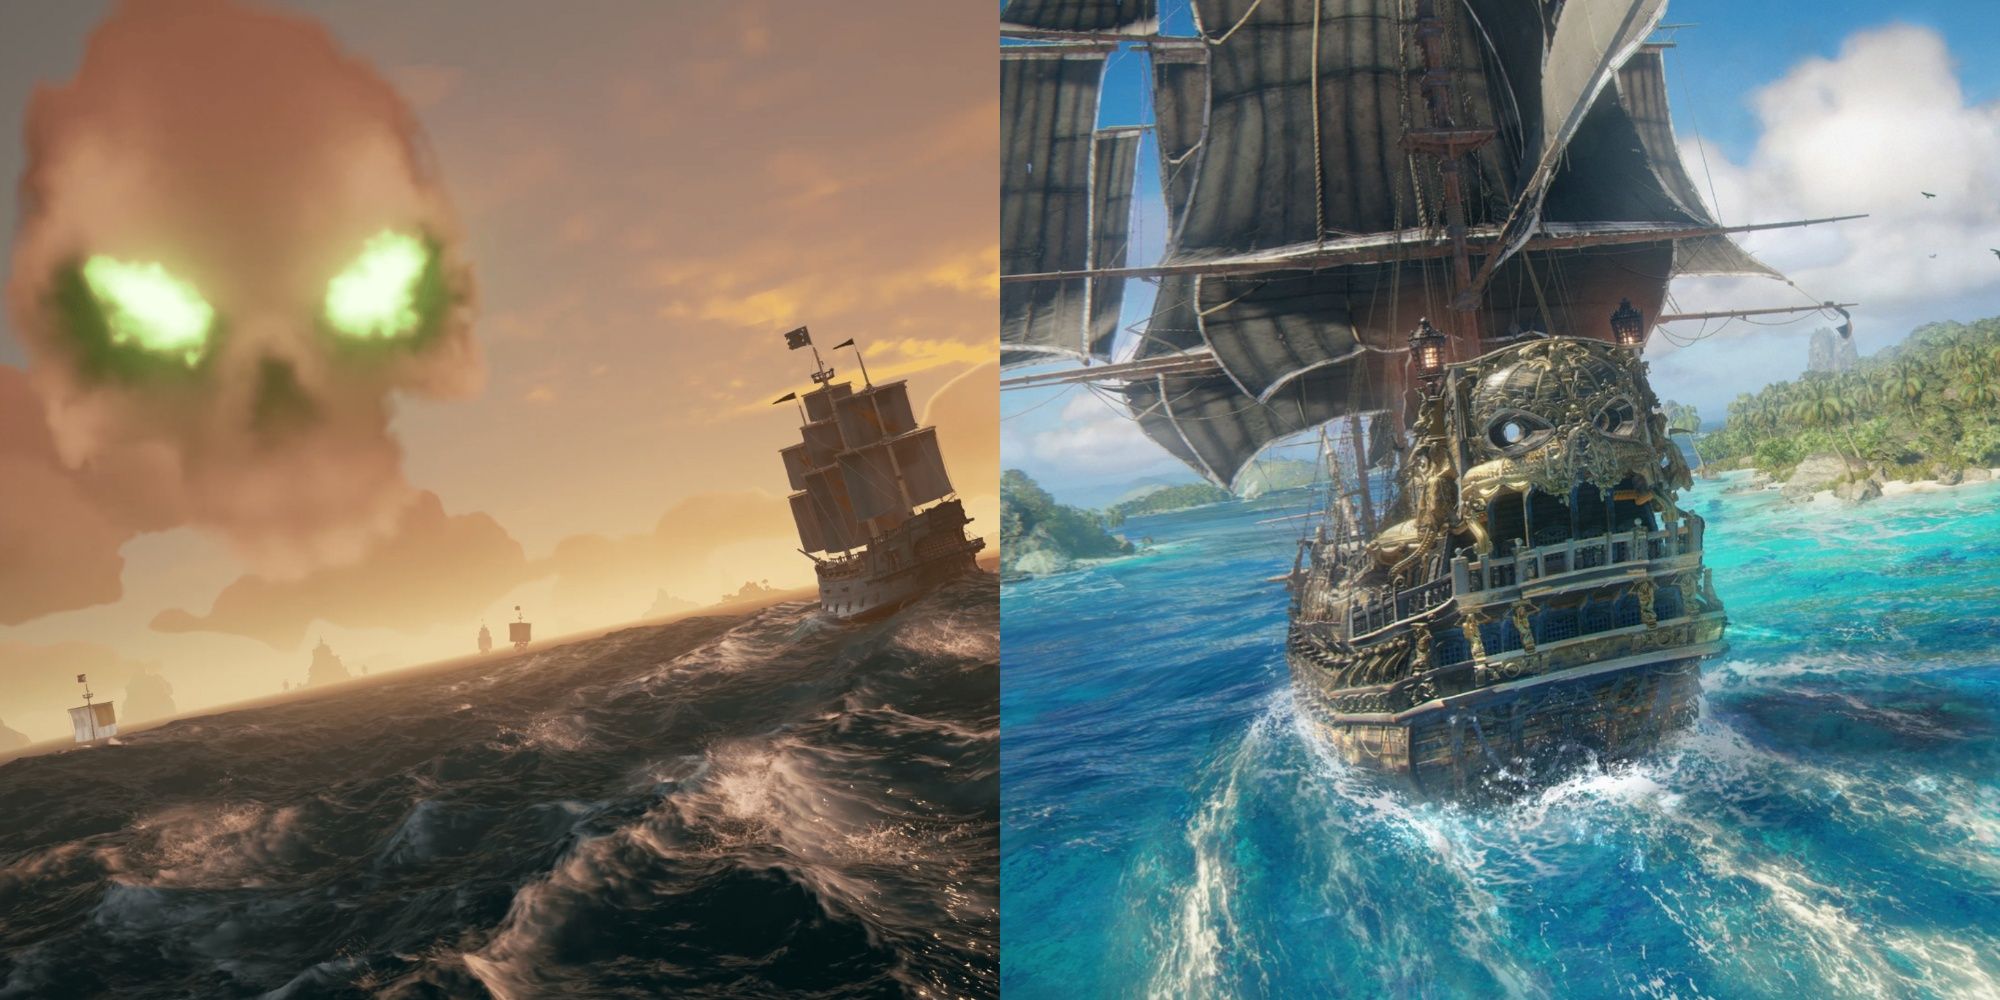 Promotional Images Of Sea Of Thieves And Skull And Bones.